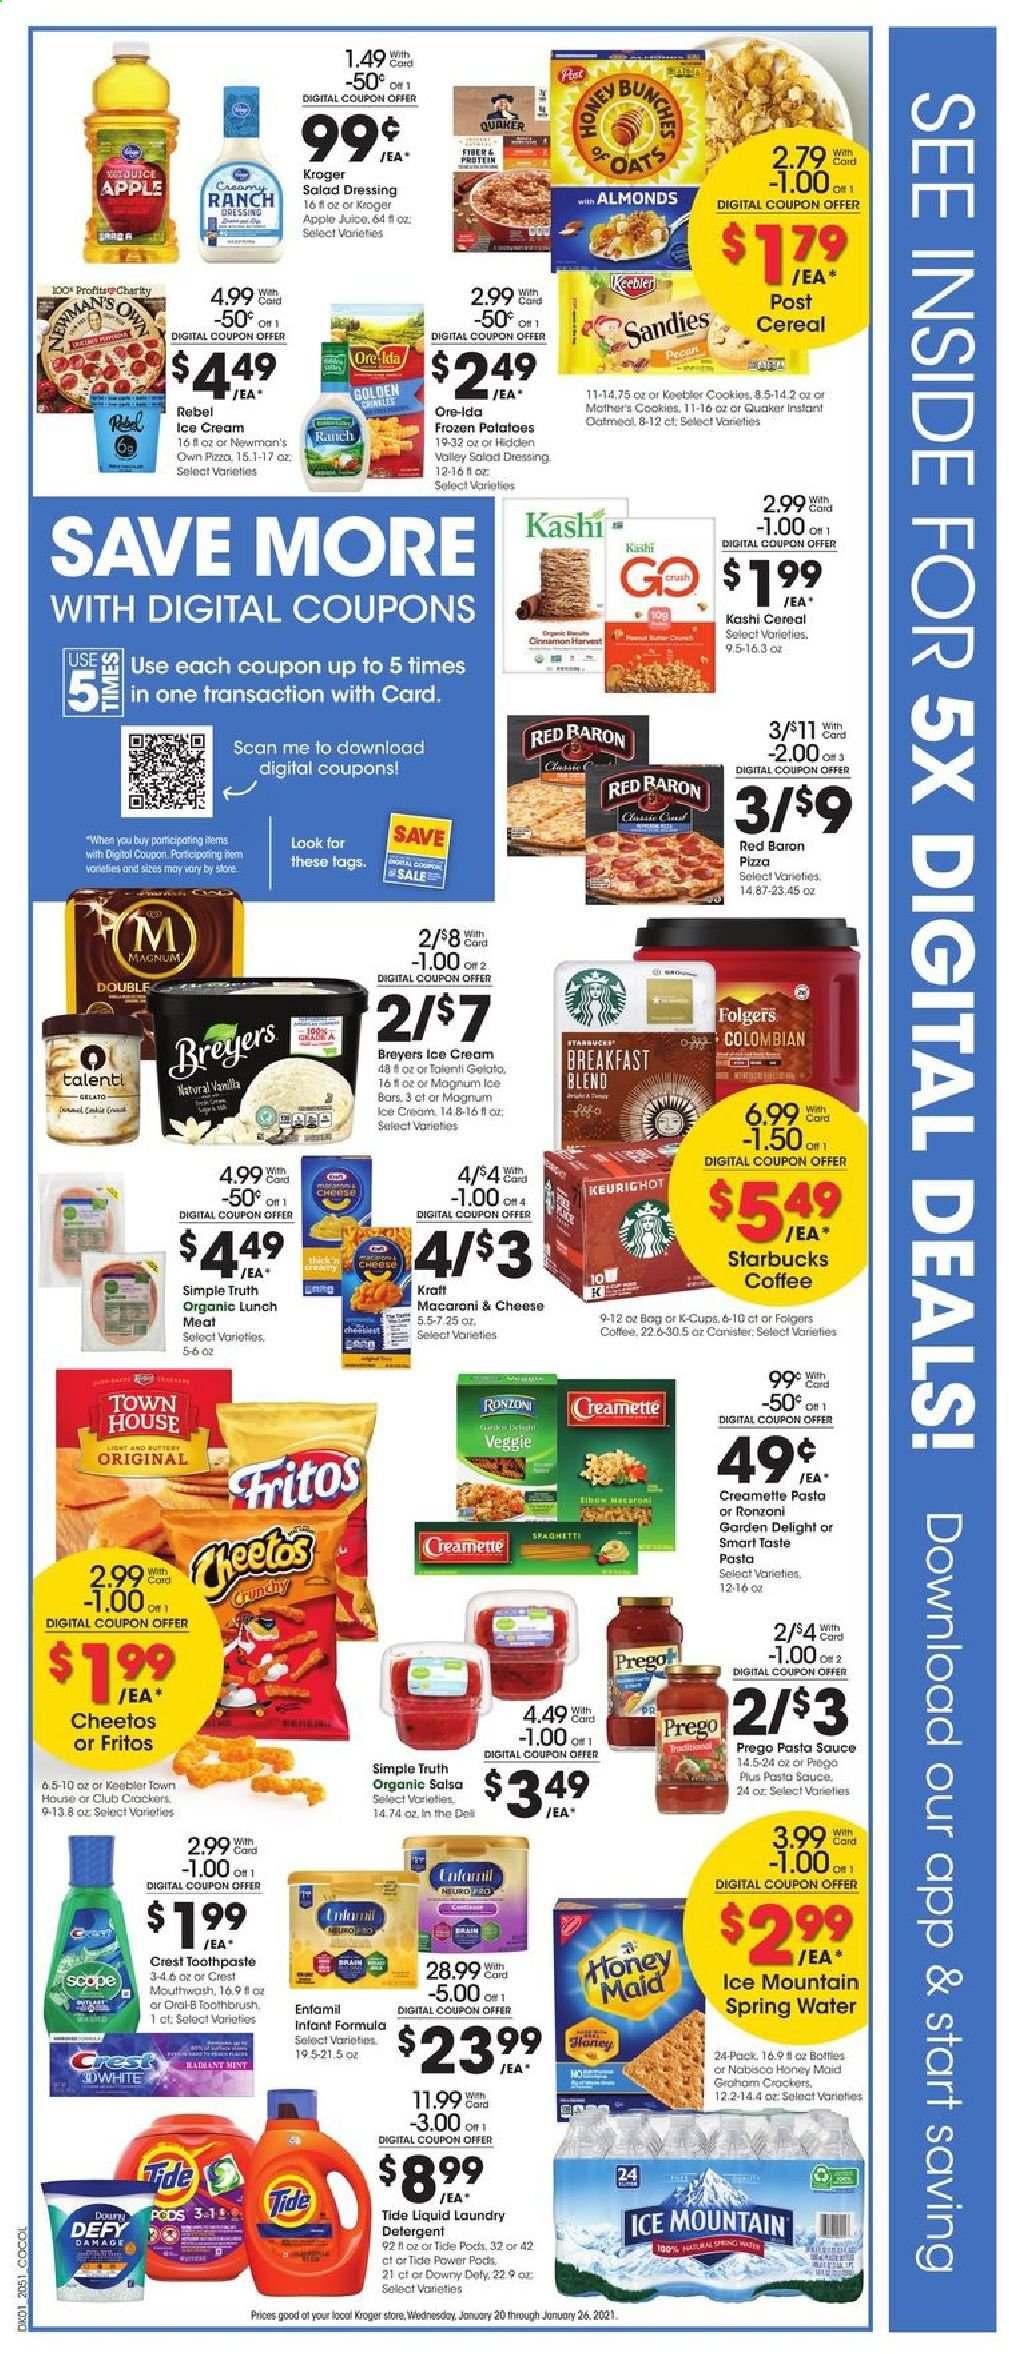 thumbnail - Kroger Flyer - 01/20/2021 - 01/26/2021 - Sales products - Apple, pizza, Quaker, Kraft®, lunch meat, curd, salsa, ice cream, Talenti Gelato, gelato, Ore-Ida, Red Baron, cookies, Keebler, Cheetos, oatmeal, oats, cereals, Fritos, Honey Maid, spaghetti, Creamette, salad dressing, pasta sauce, dressing, almonds, apple juice, juice, spring water, Ice Mountain, tea, coffee, Starbucks, Folgers, coffee capsules, K-Cups, breakfast blend, Enfamil, detergent, Tide, laundry detergent, toothbrush, Oral-B, toothpaste, mouthwash, Crest, canister, bunches. Page 2.